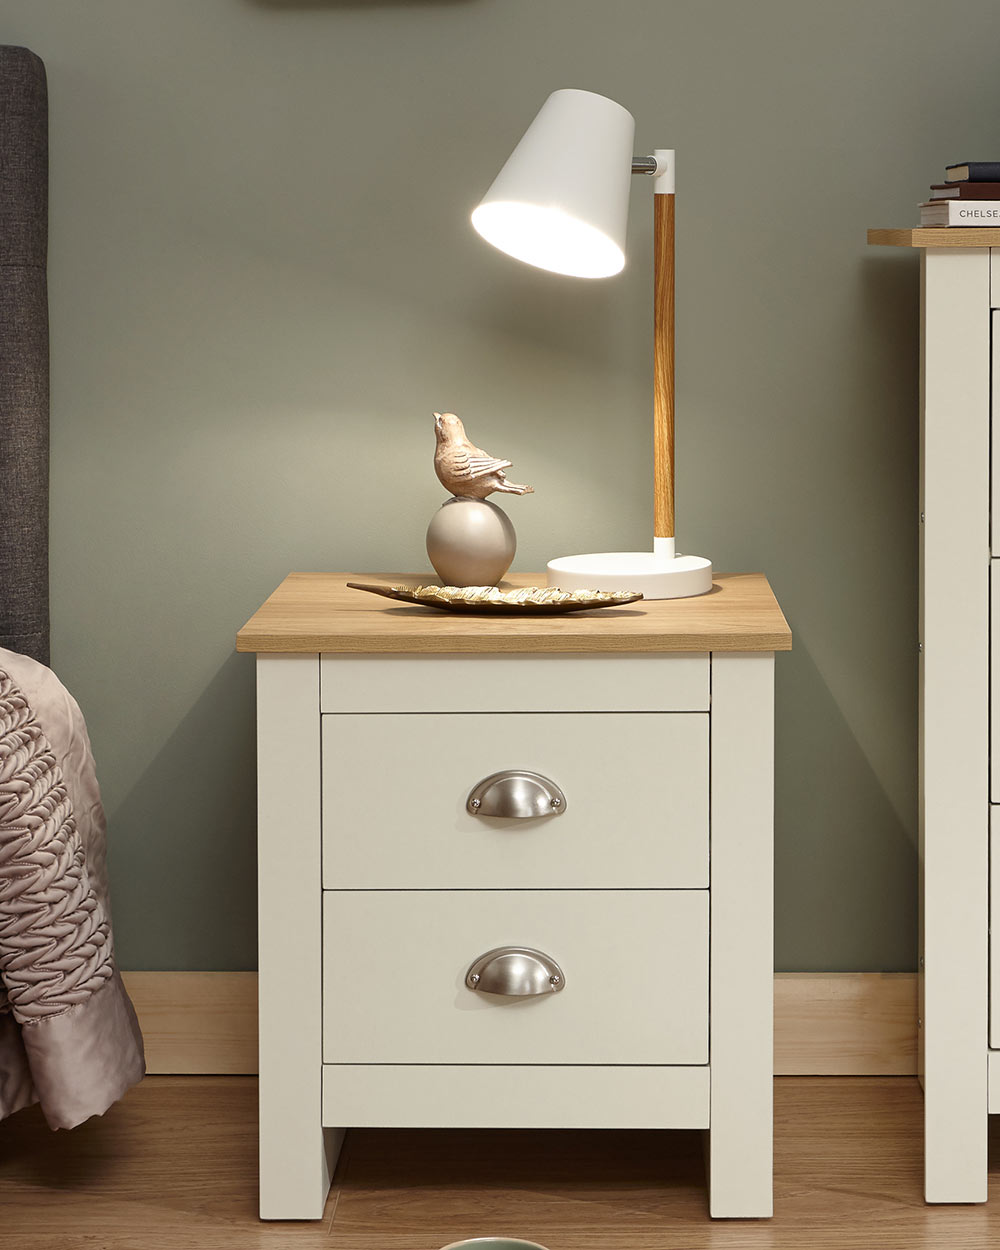 Lancaster bedside cabinet in cream with an oak effect top in a bedroom lifestyle setting with a lamp and decorative accessories on top